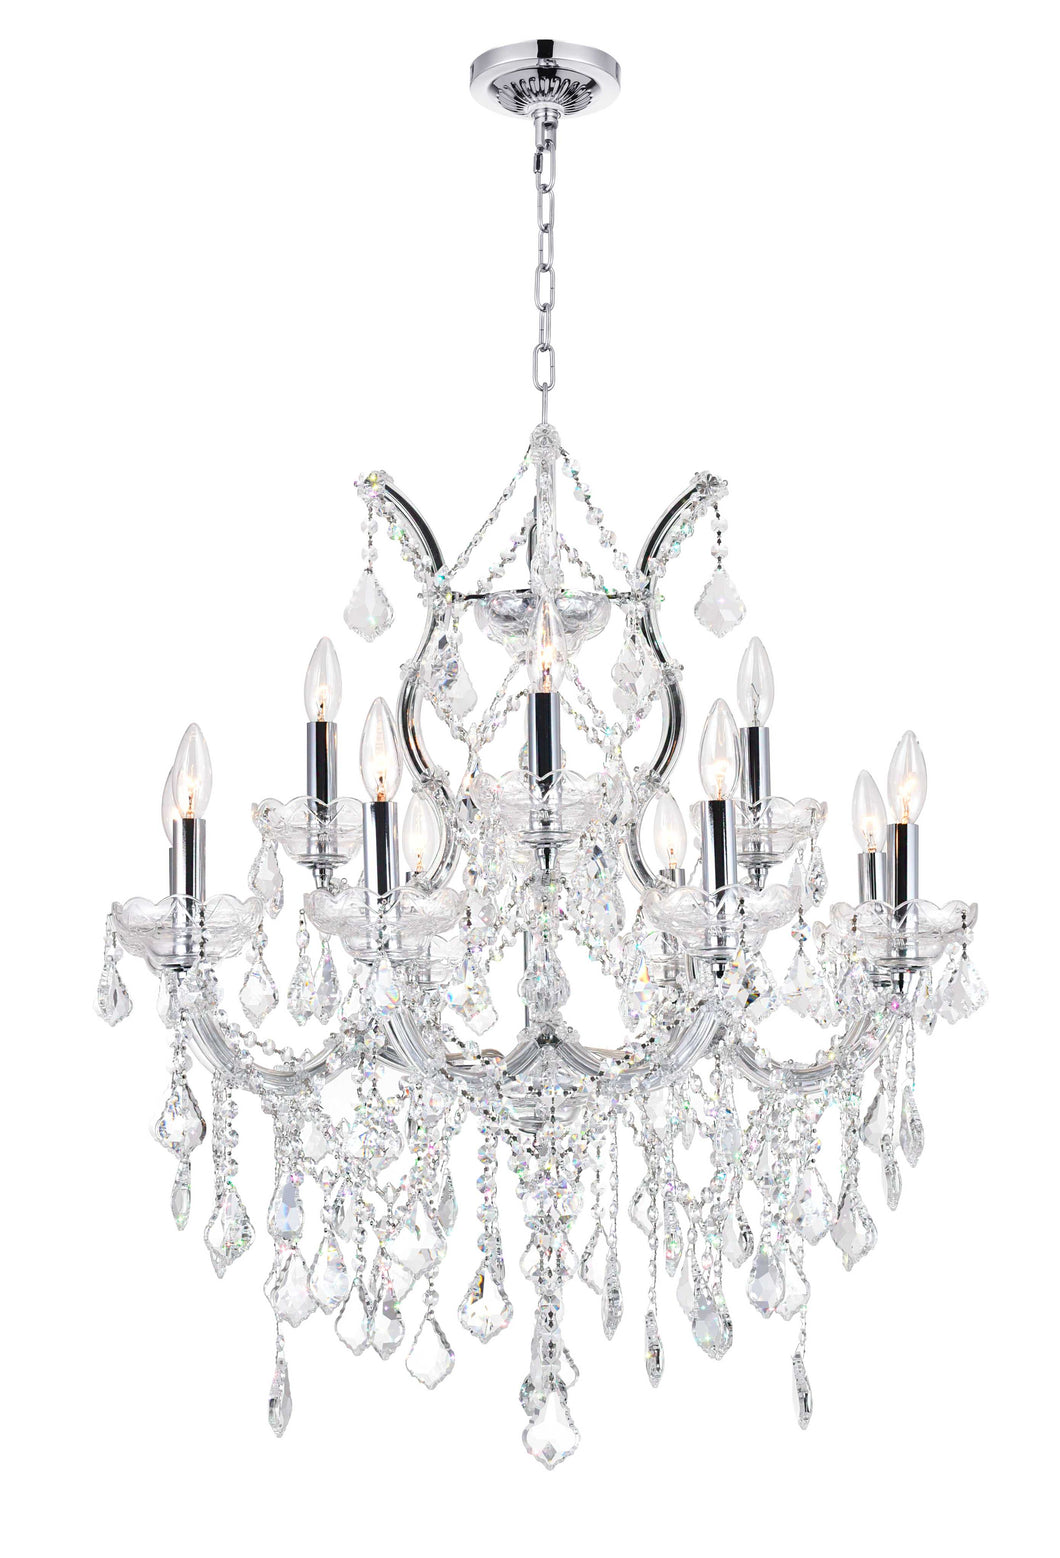 13 Light Up Chandelier with Chrome finish